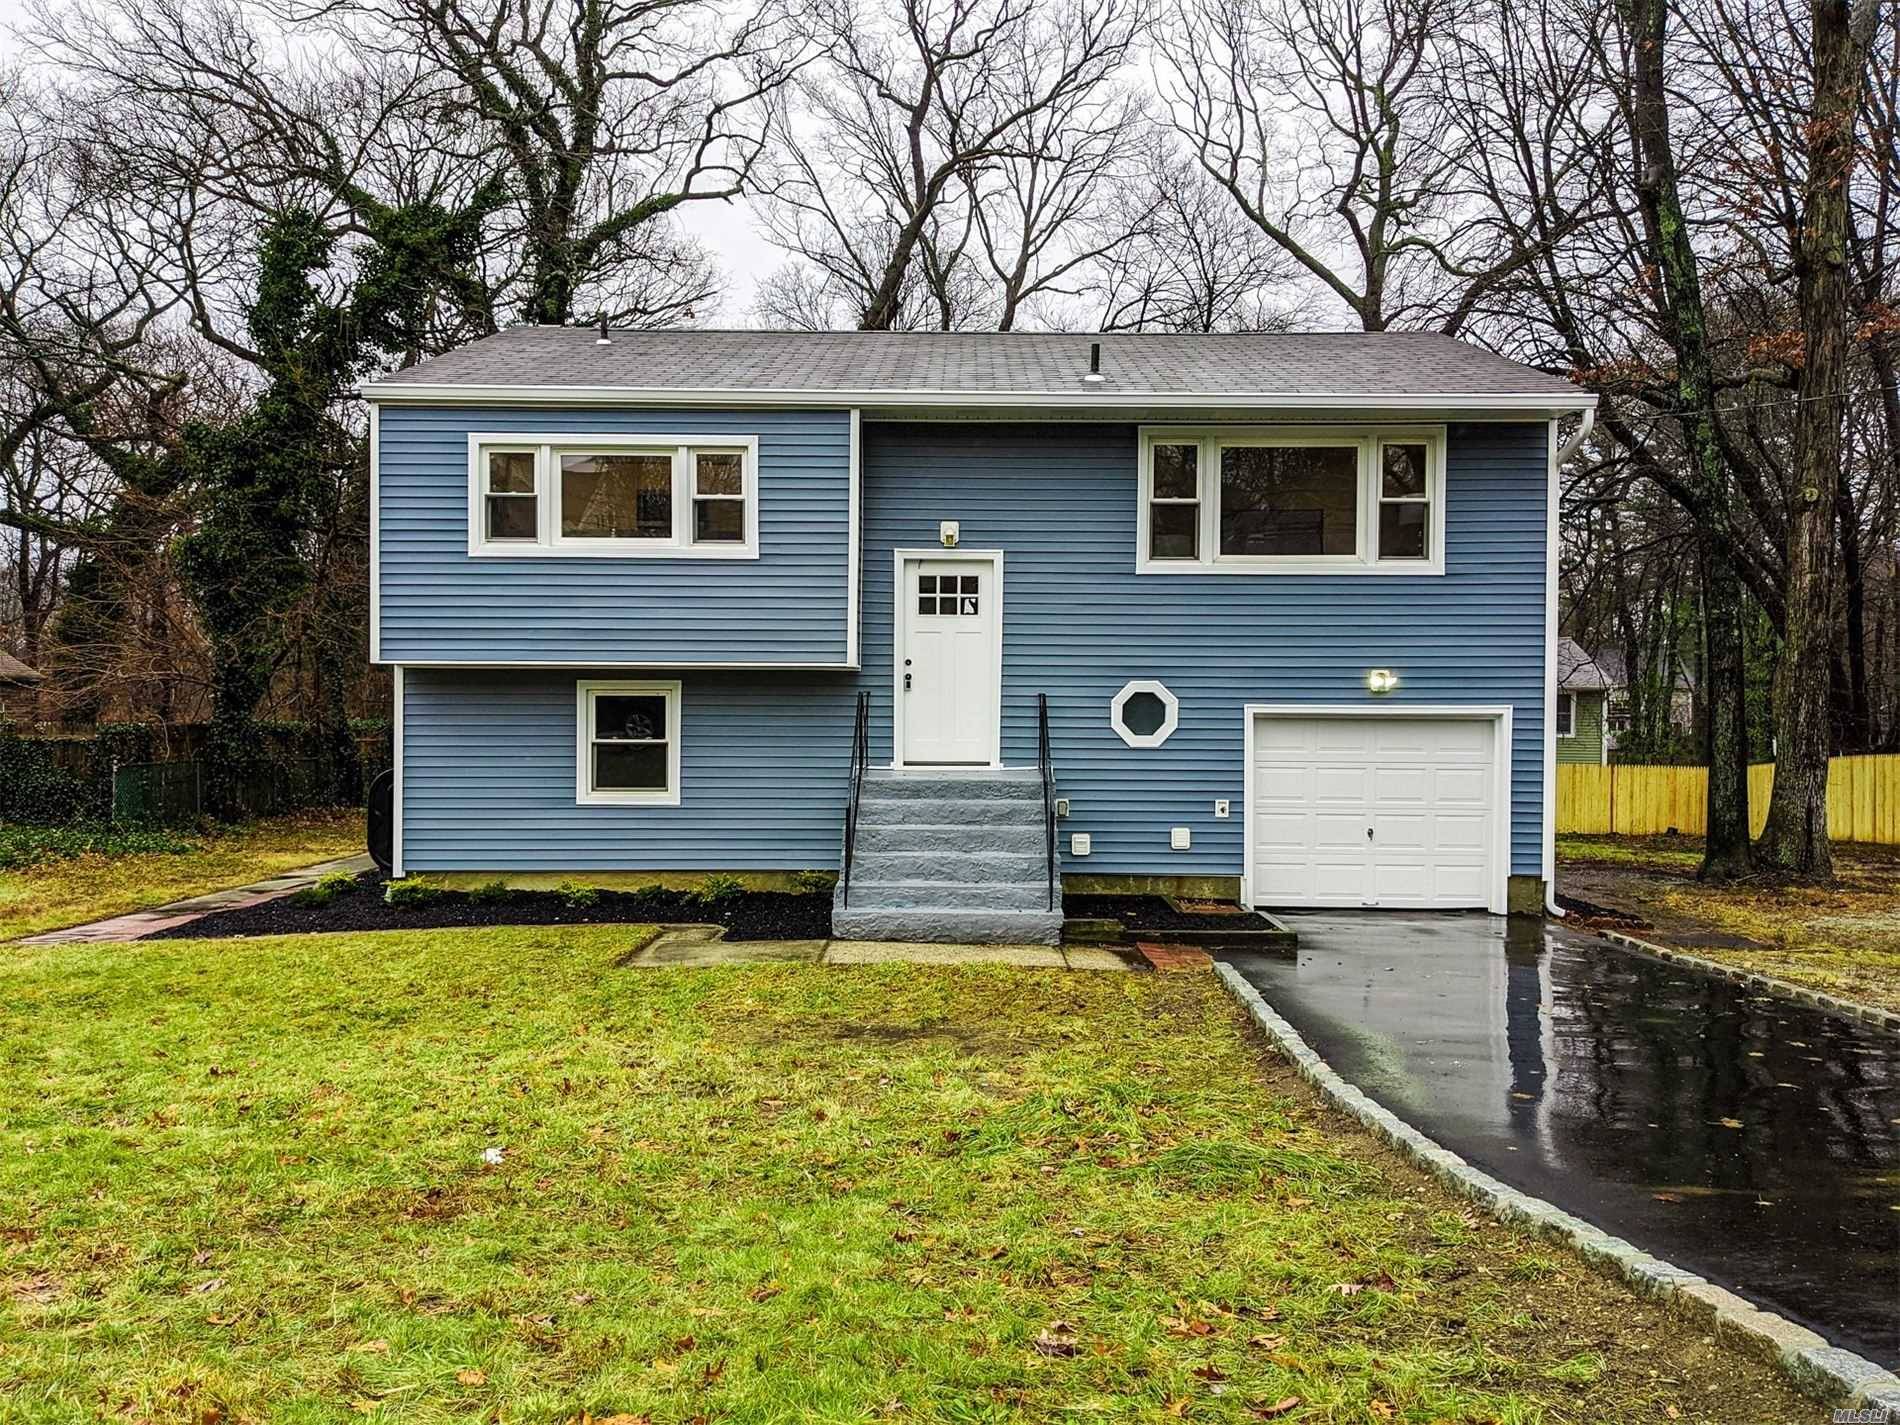 24 Oak Crest Drive Is A Diamond Renovated, Turn Key Move In Ready 4 Bedroom 2 Bath Hi Ranch Featuring All New Siding, Hardwood Floors Throughout, Spacious Bedrooms, Large Property ...